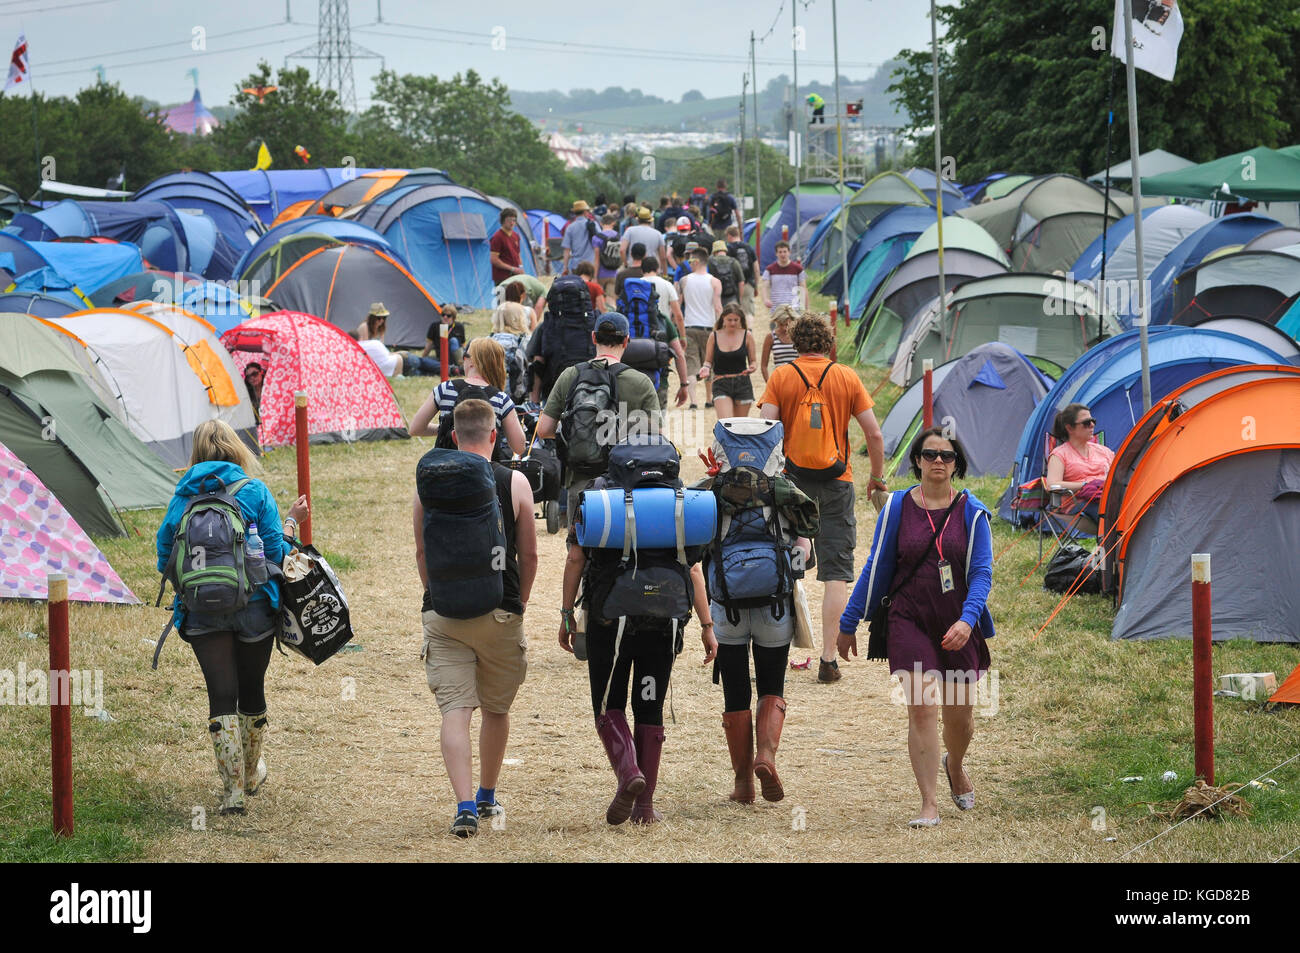 Glastonbury festival - 2013.  Festival goers walking between hundreds of tents trying to find a space to pitch their tent. Stock Photo